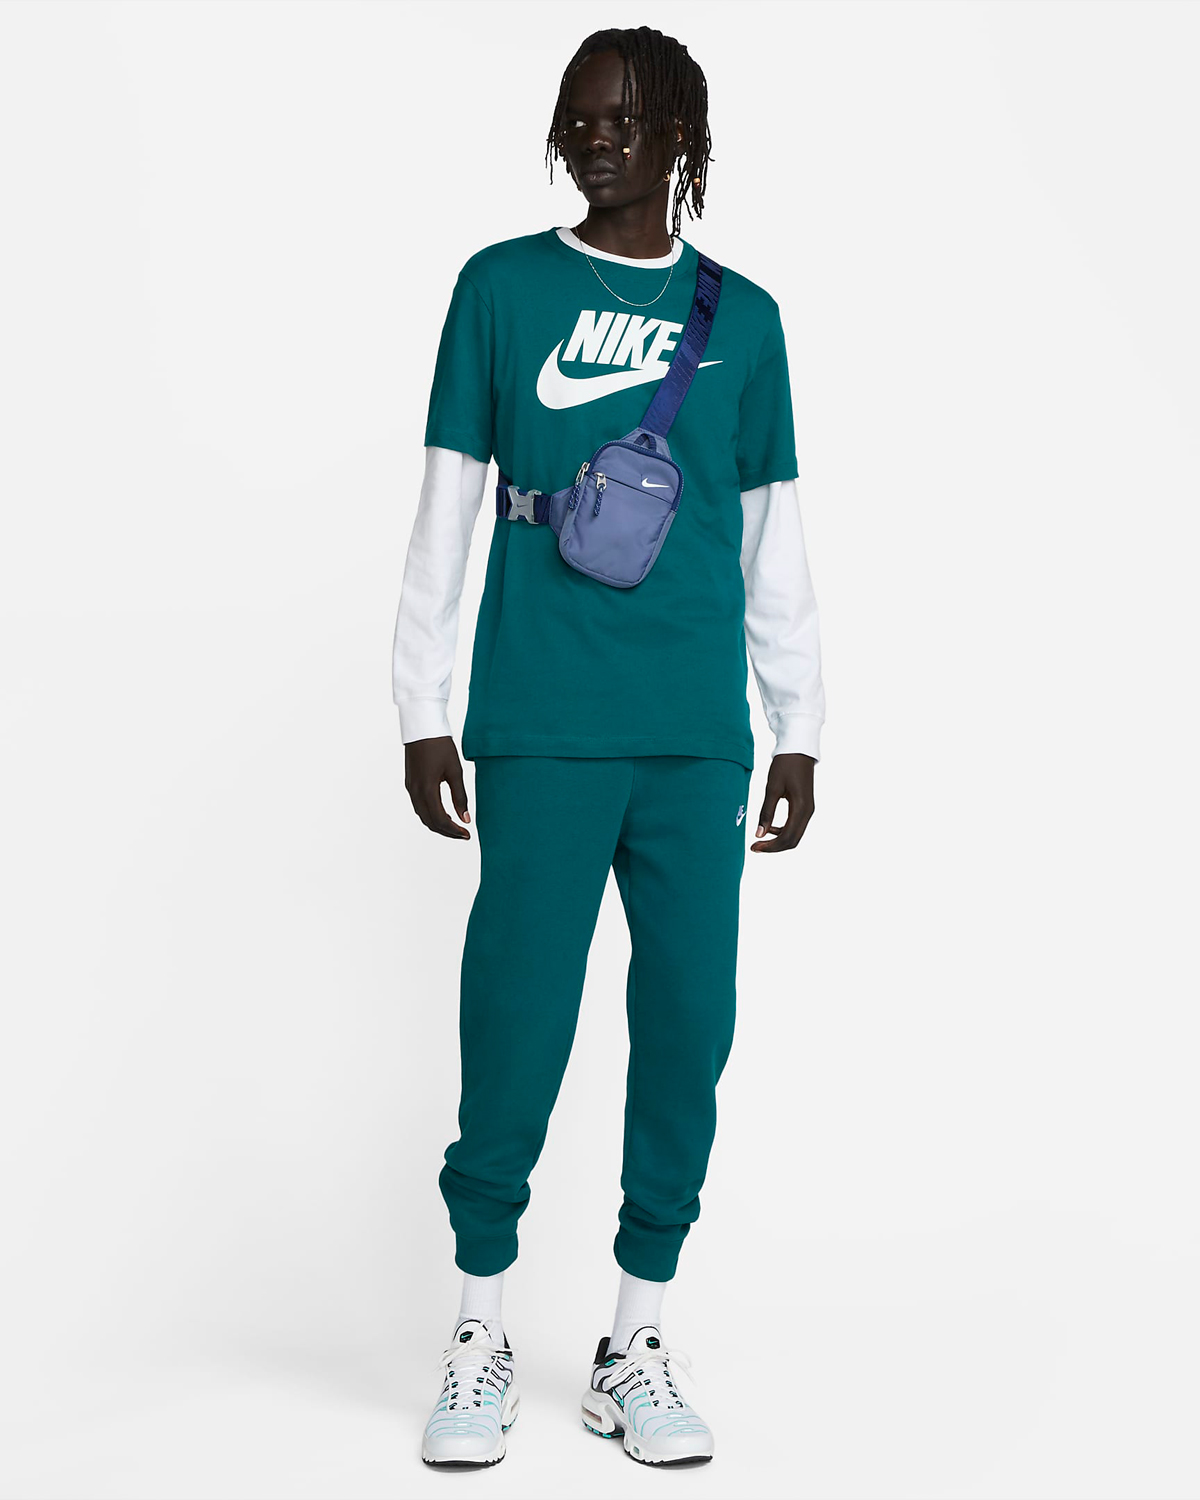 Nike-Sportswear-T-Shirt-Geode-Teal-Outfit